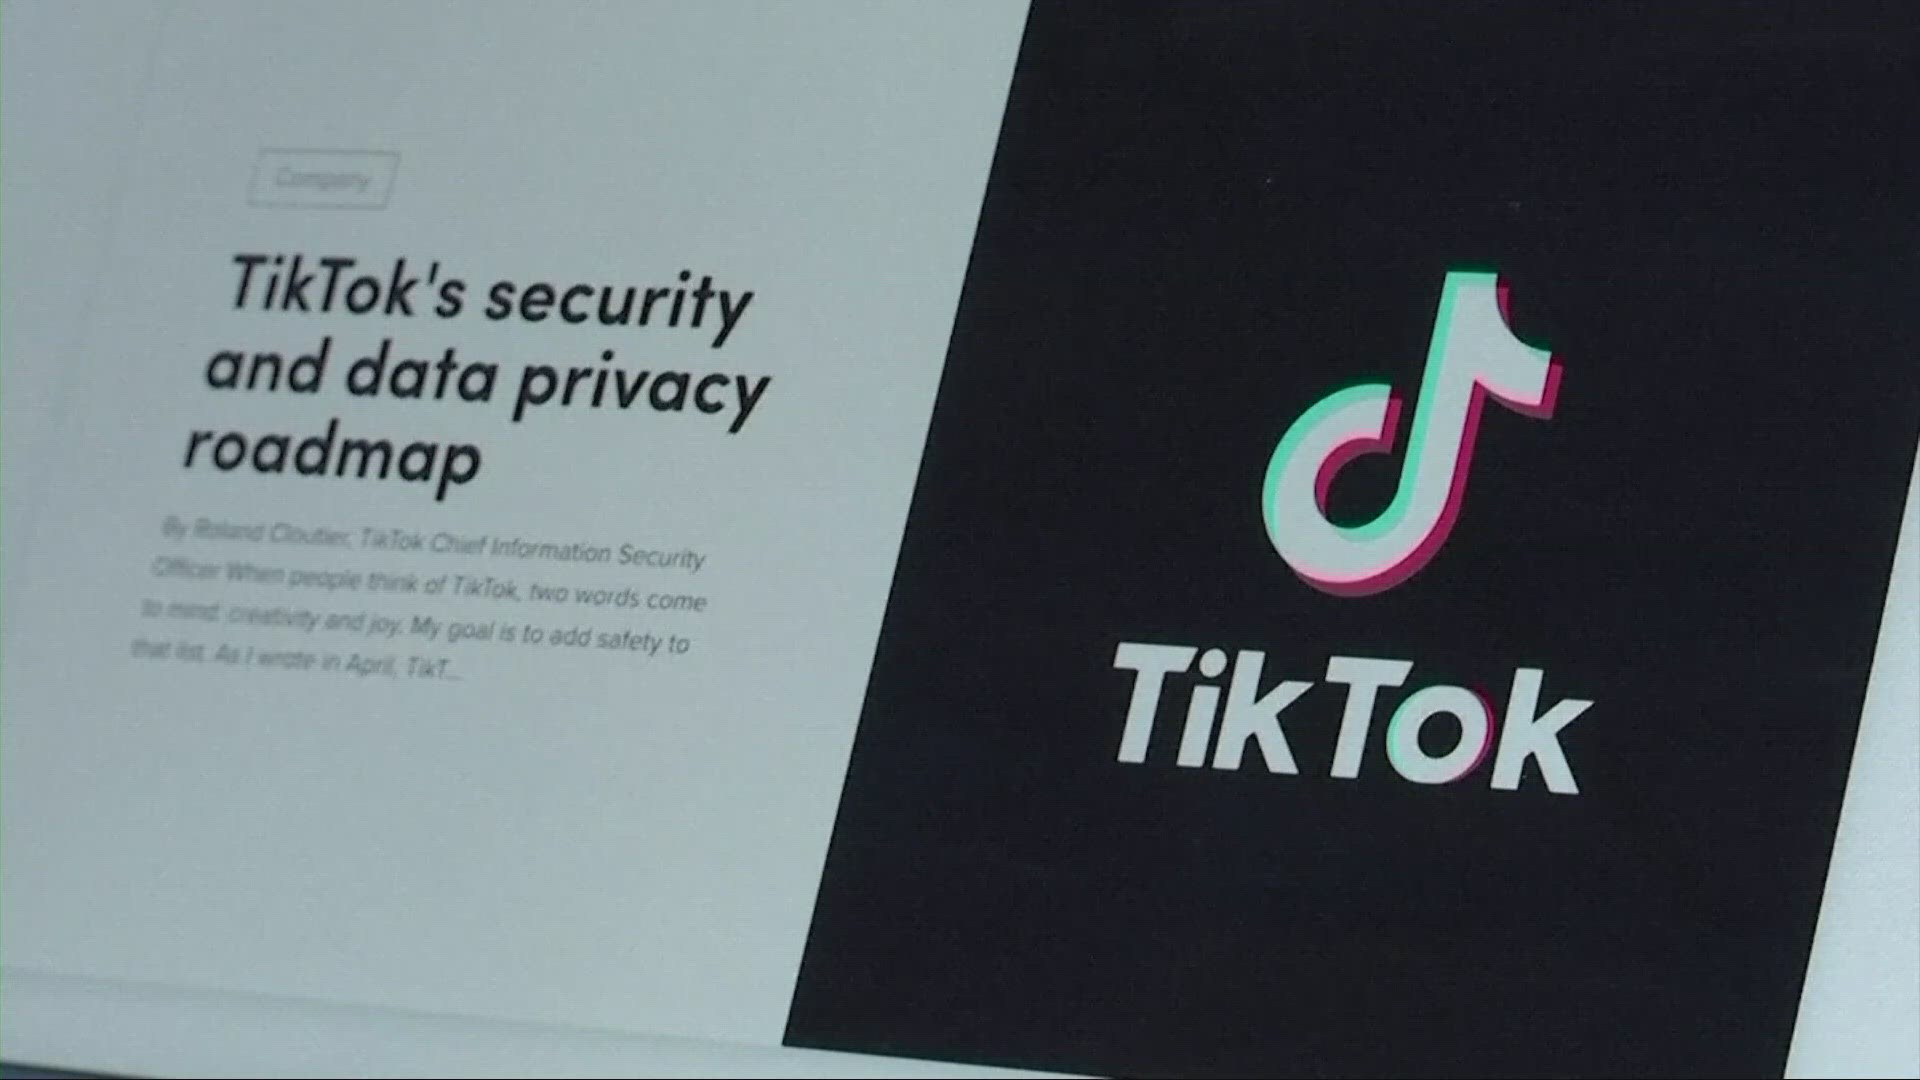 Montana has signed a new law banning the use of the TikTok app. Stephanie Haney has the latest in a new edition of 'Legally Speaking.'